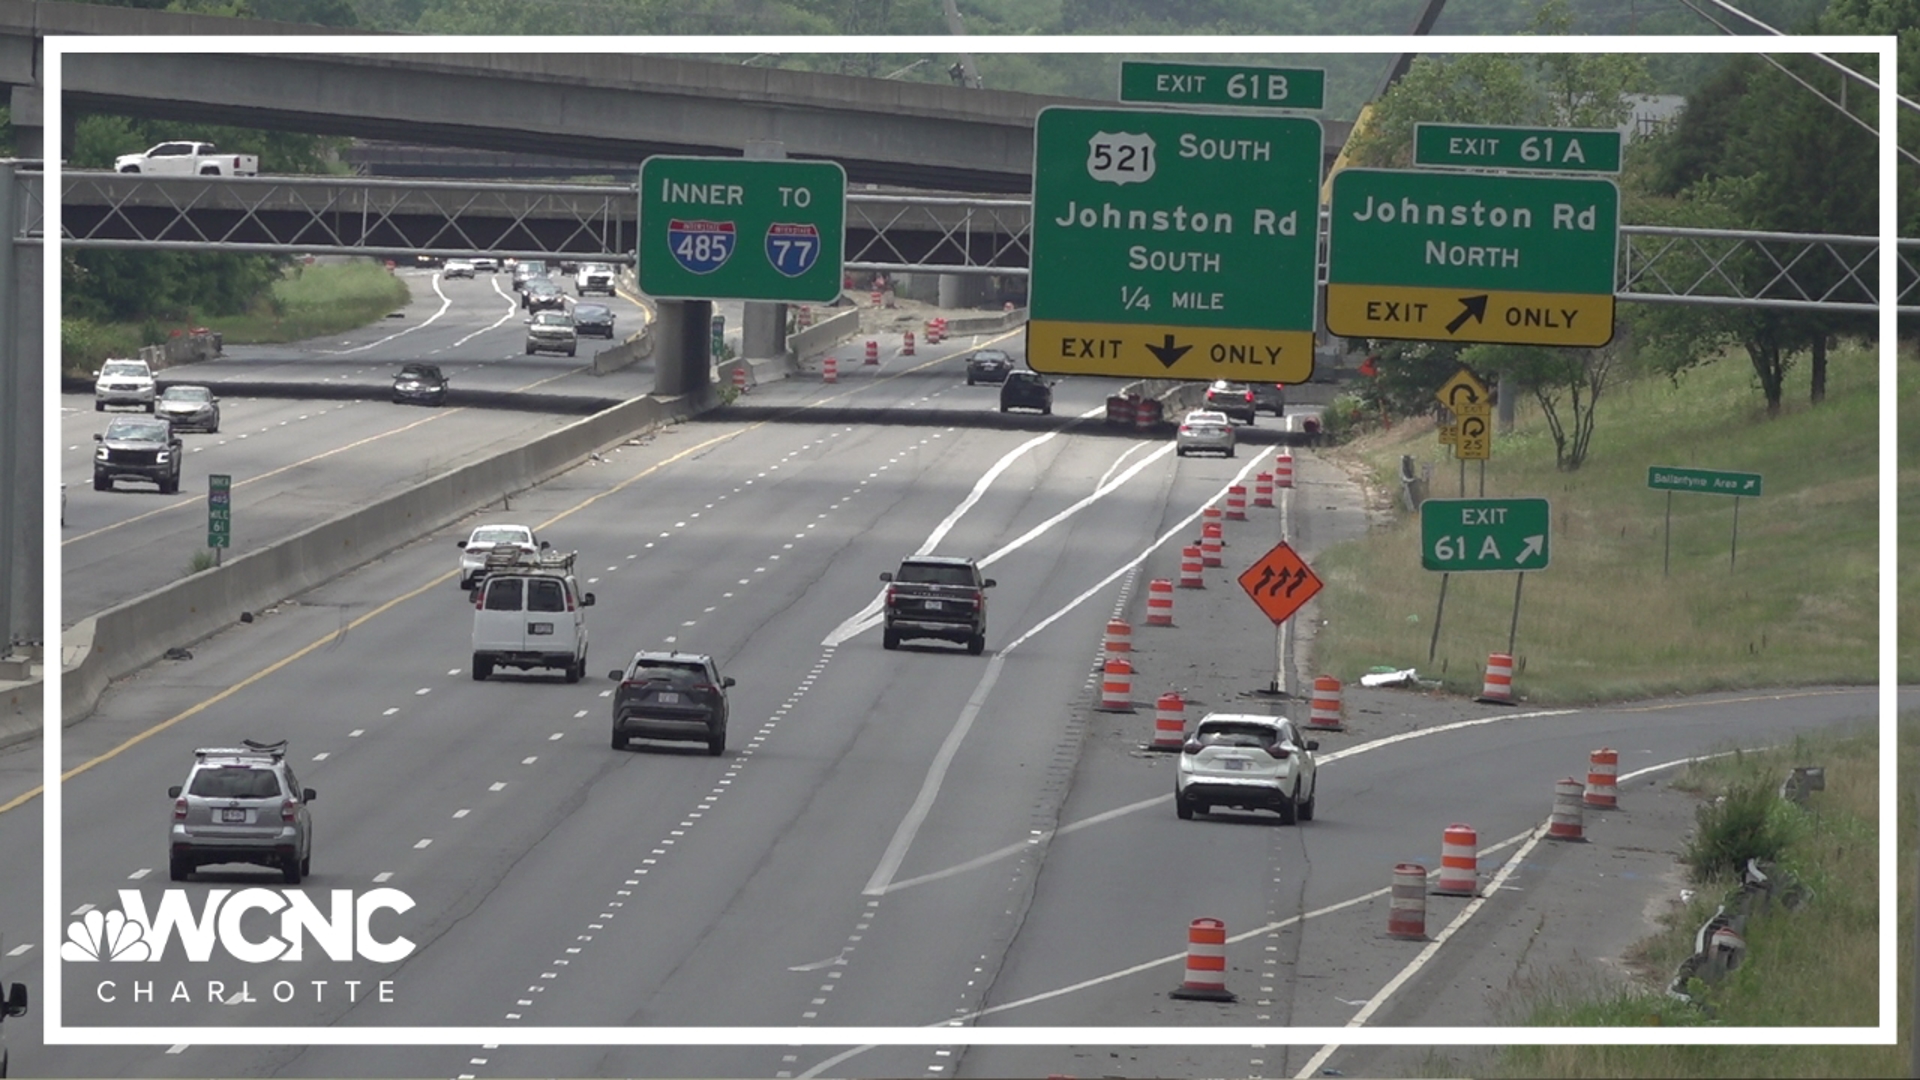 There were 51 crashes between Providence Road and Johnston Road on the I-485 inner loop in March and April.